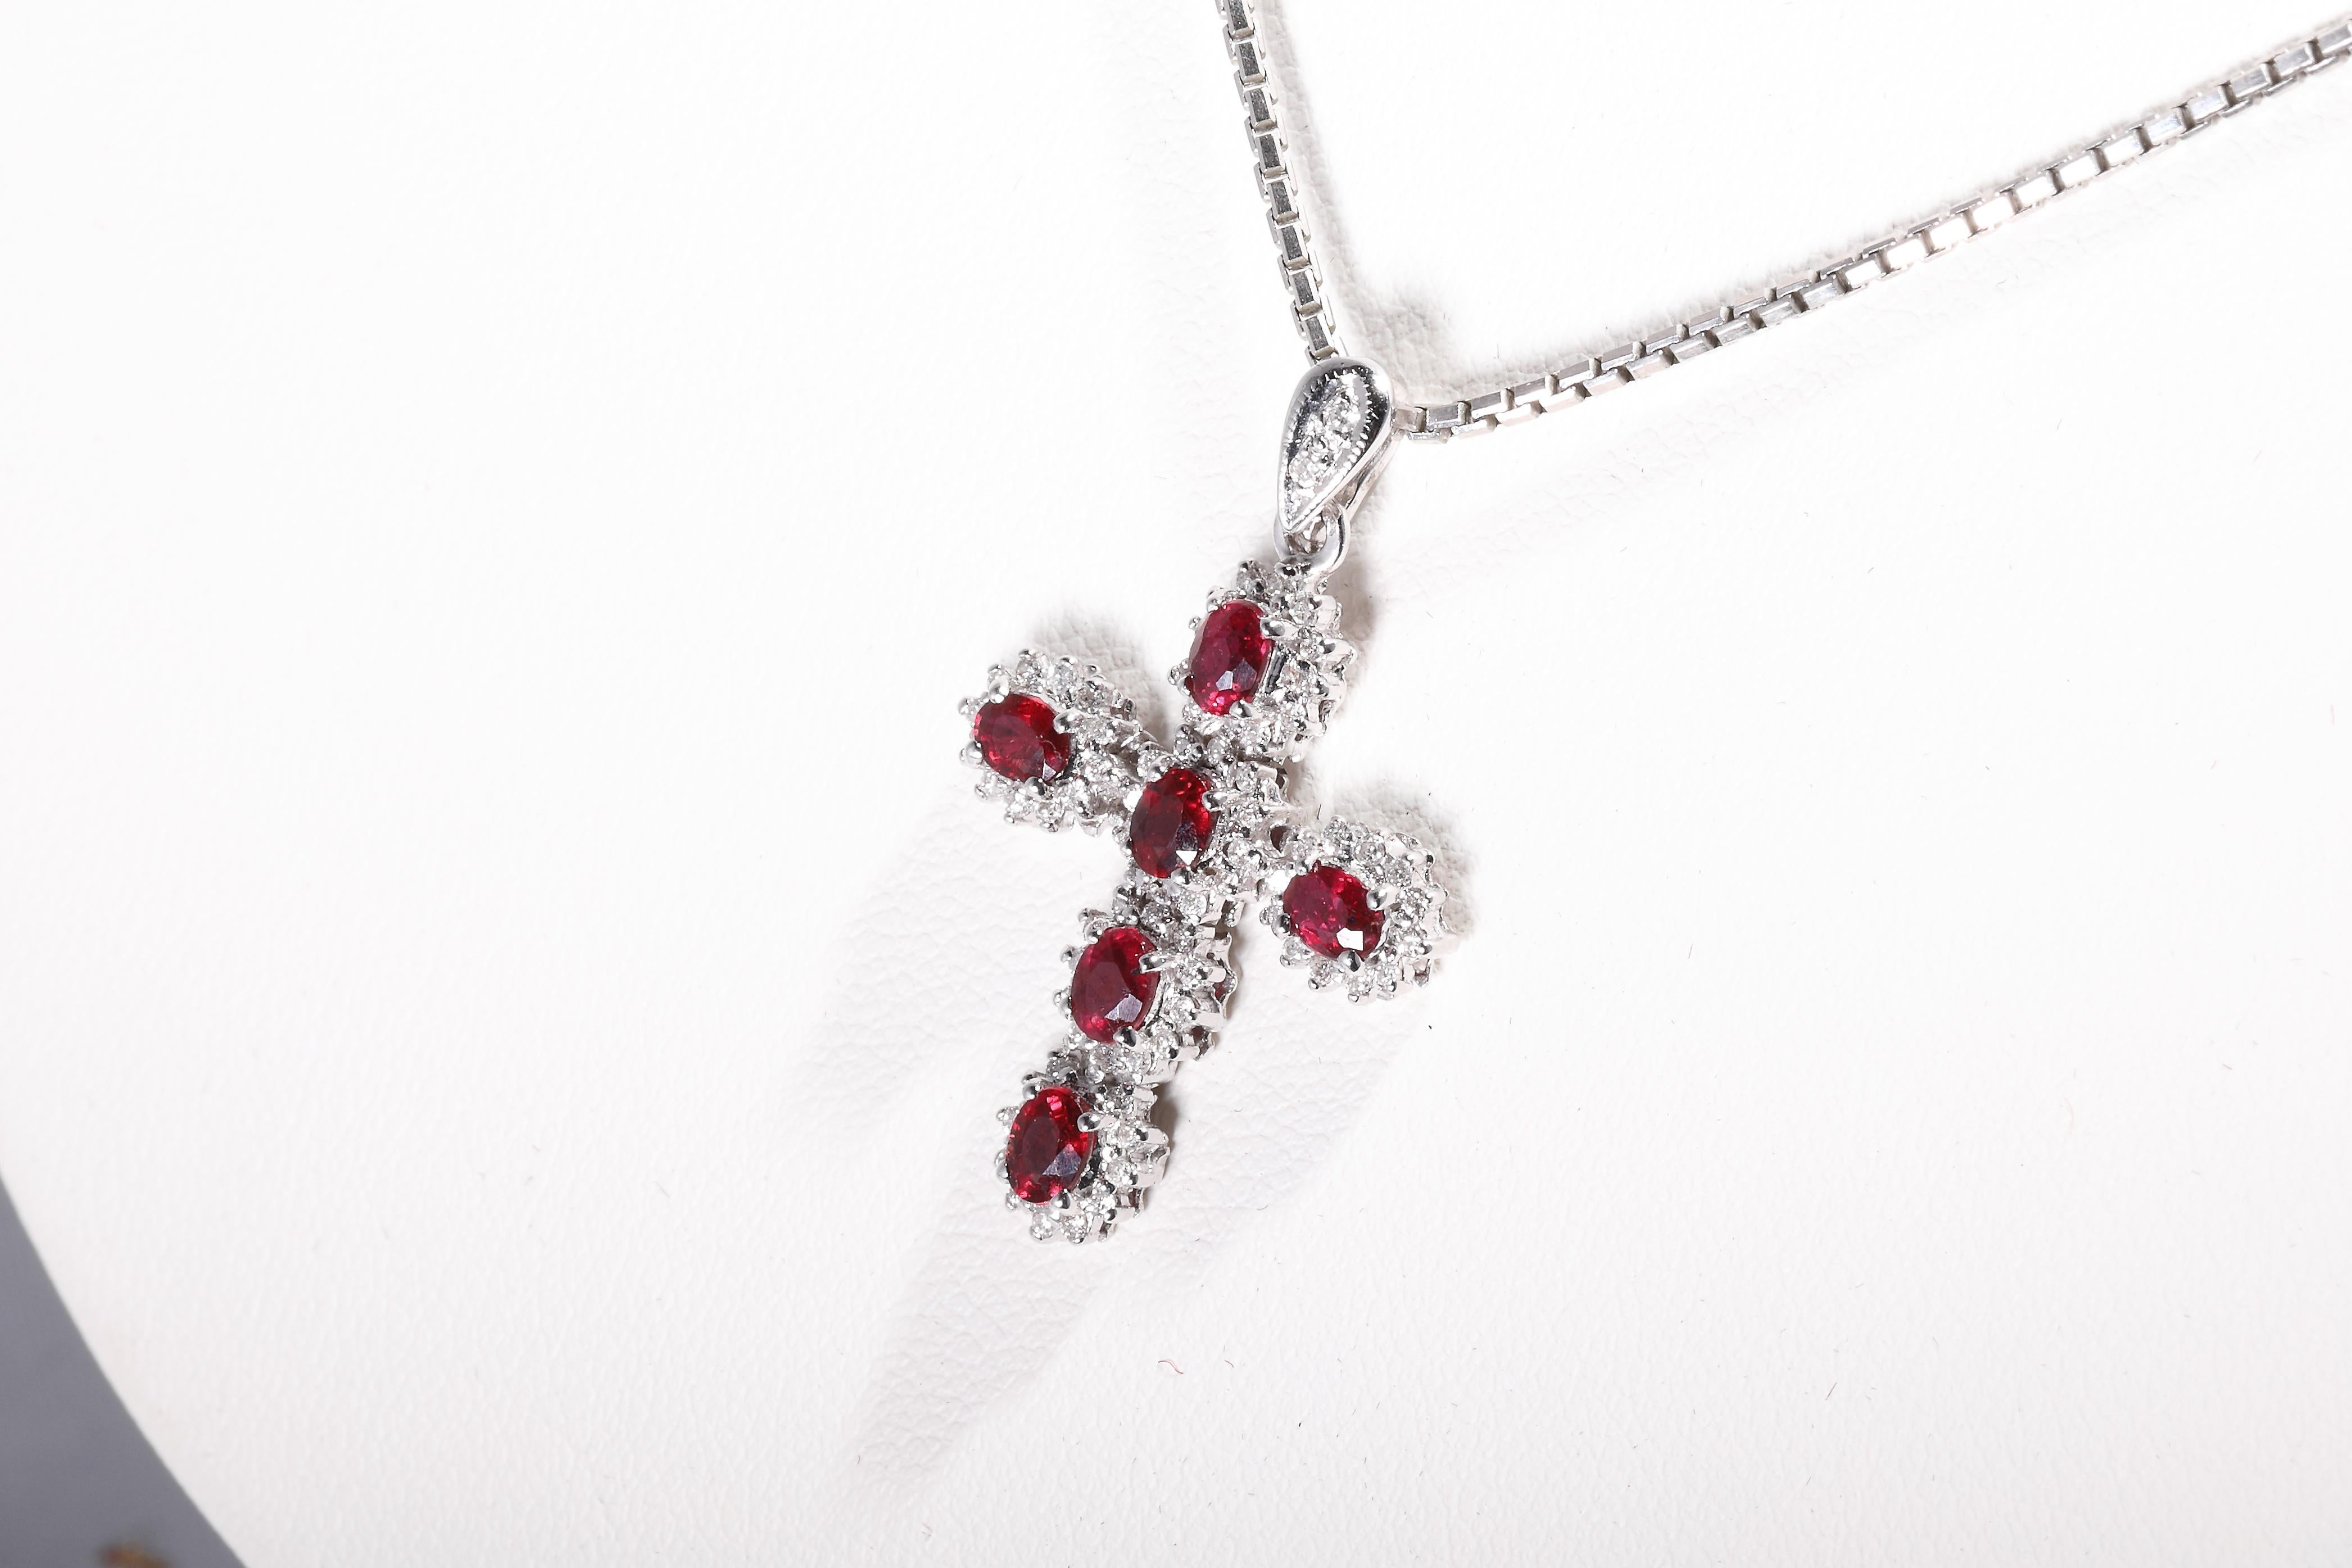 18 k white gold 
hallmarked with fineness 750
6 ruby together 1,27 ct
diamonds together 0,27 ct
Size: 30 x 20 mm
weight: 3 grams